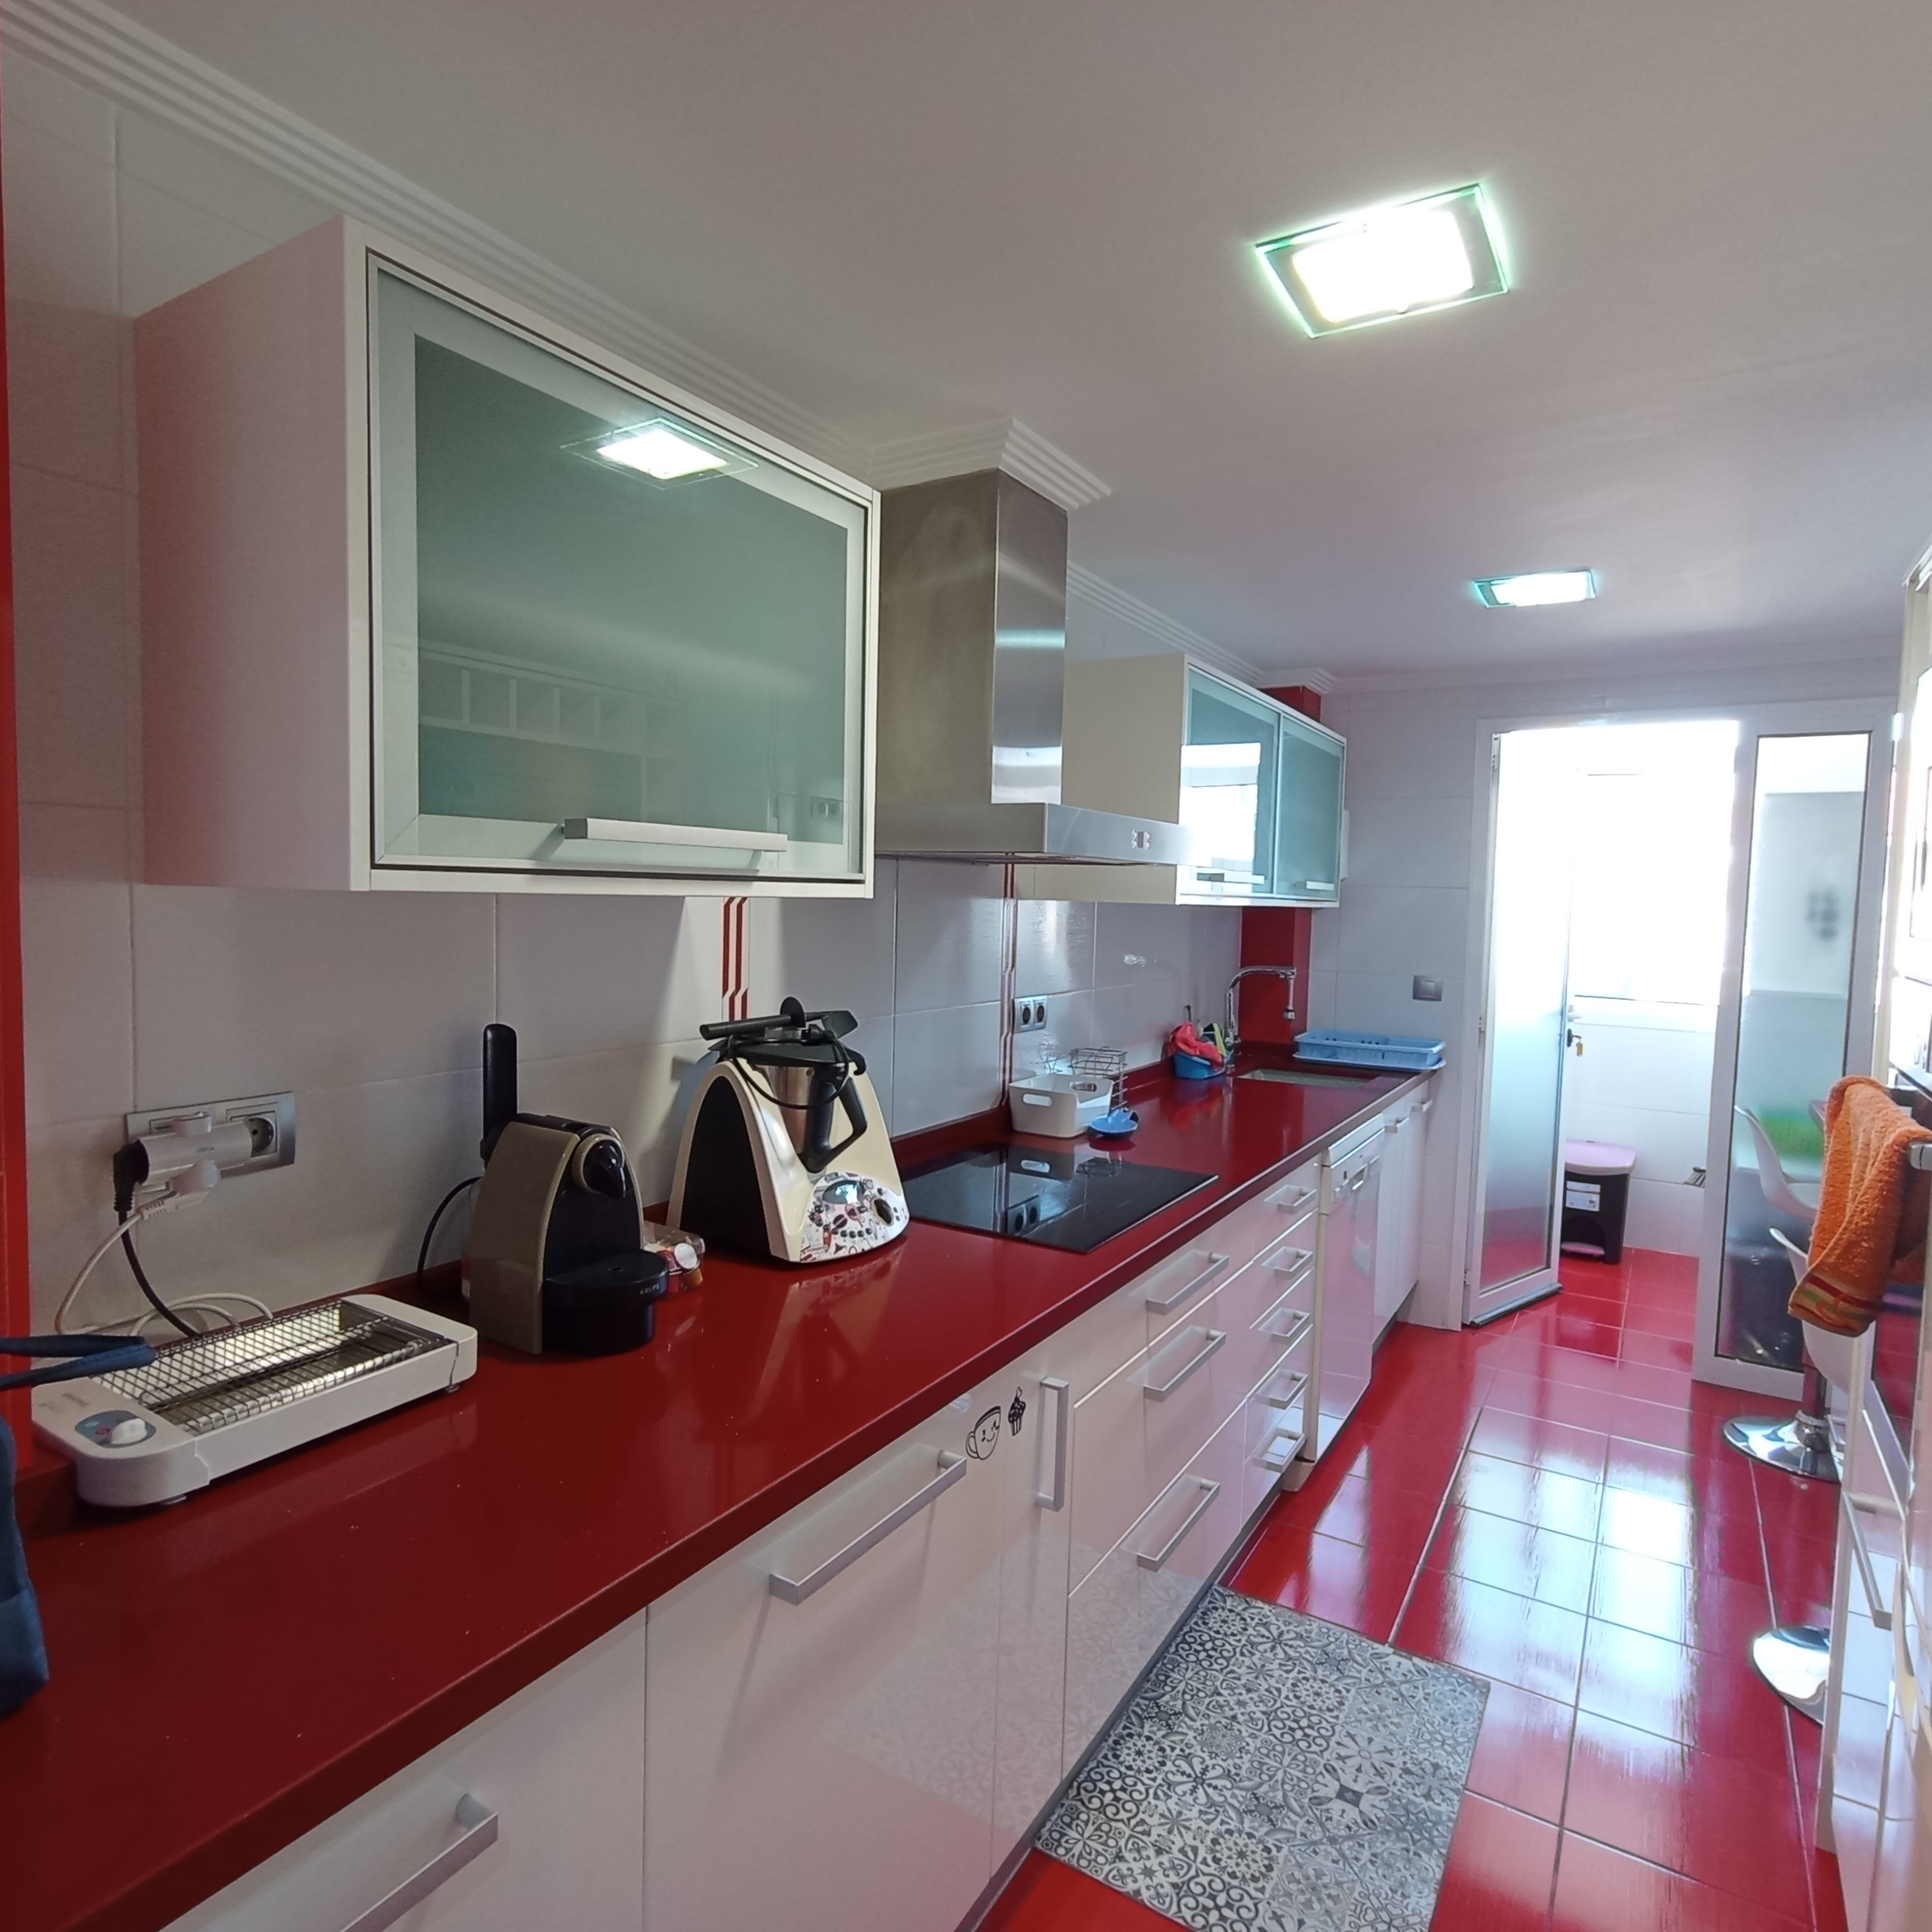 Escultor - 3 Bedroom apartment for rent in Valencia kitchen 2